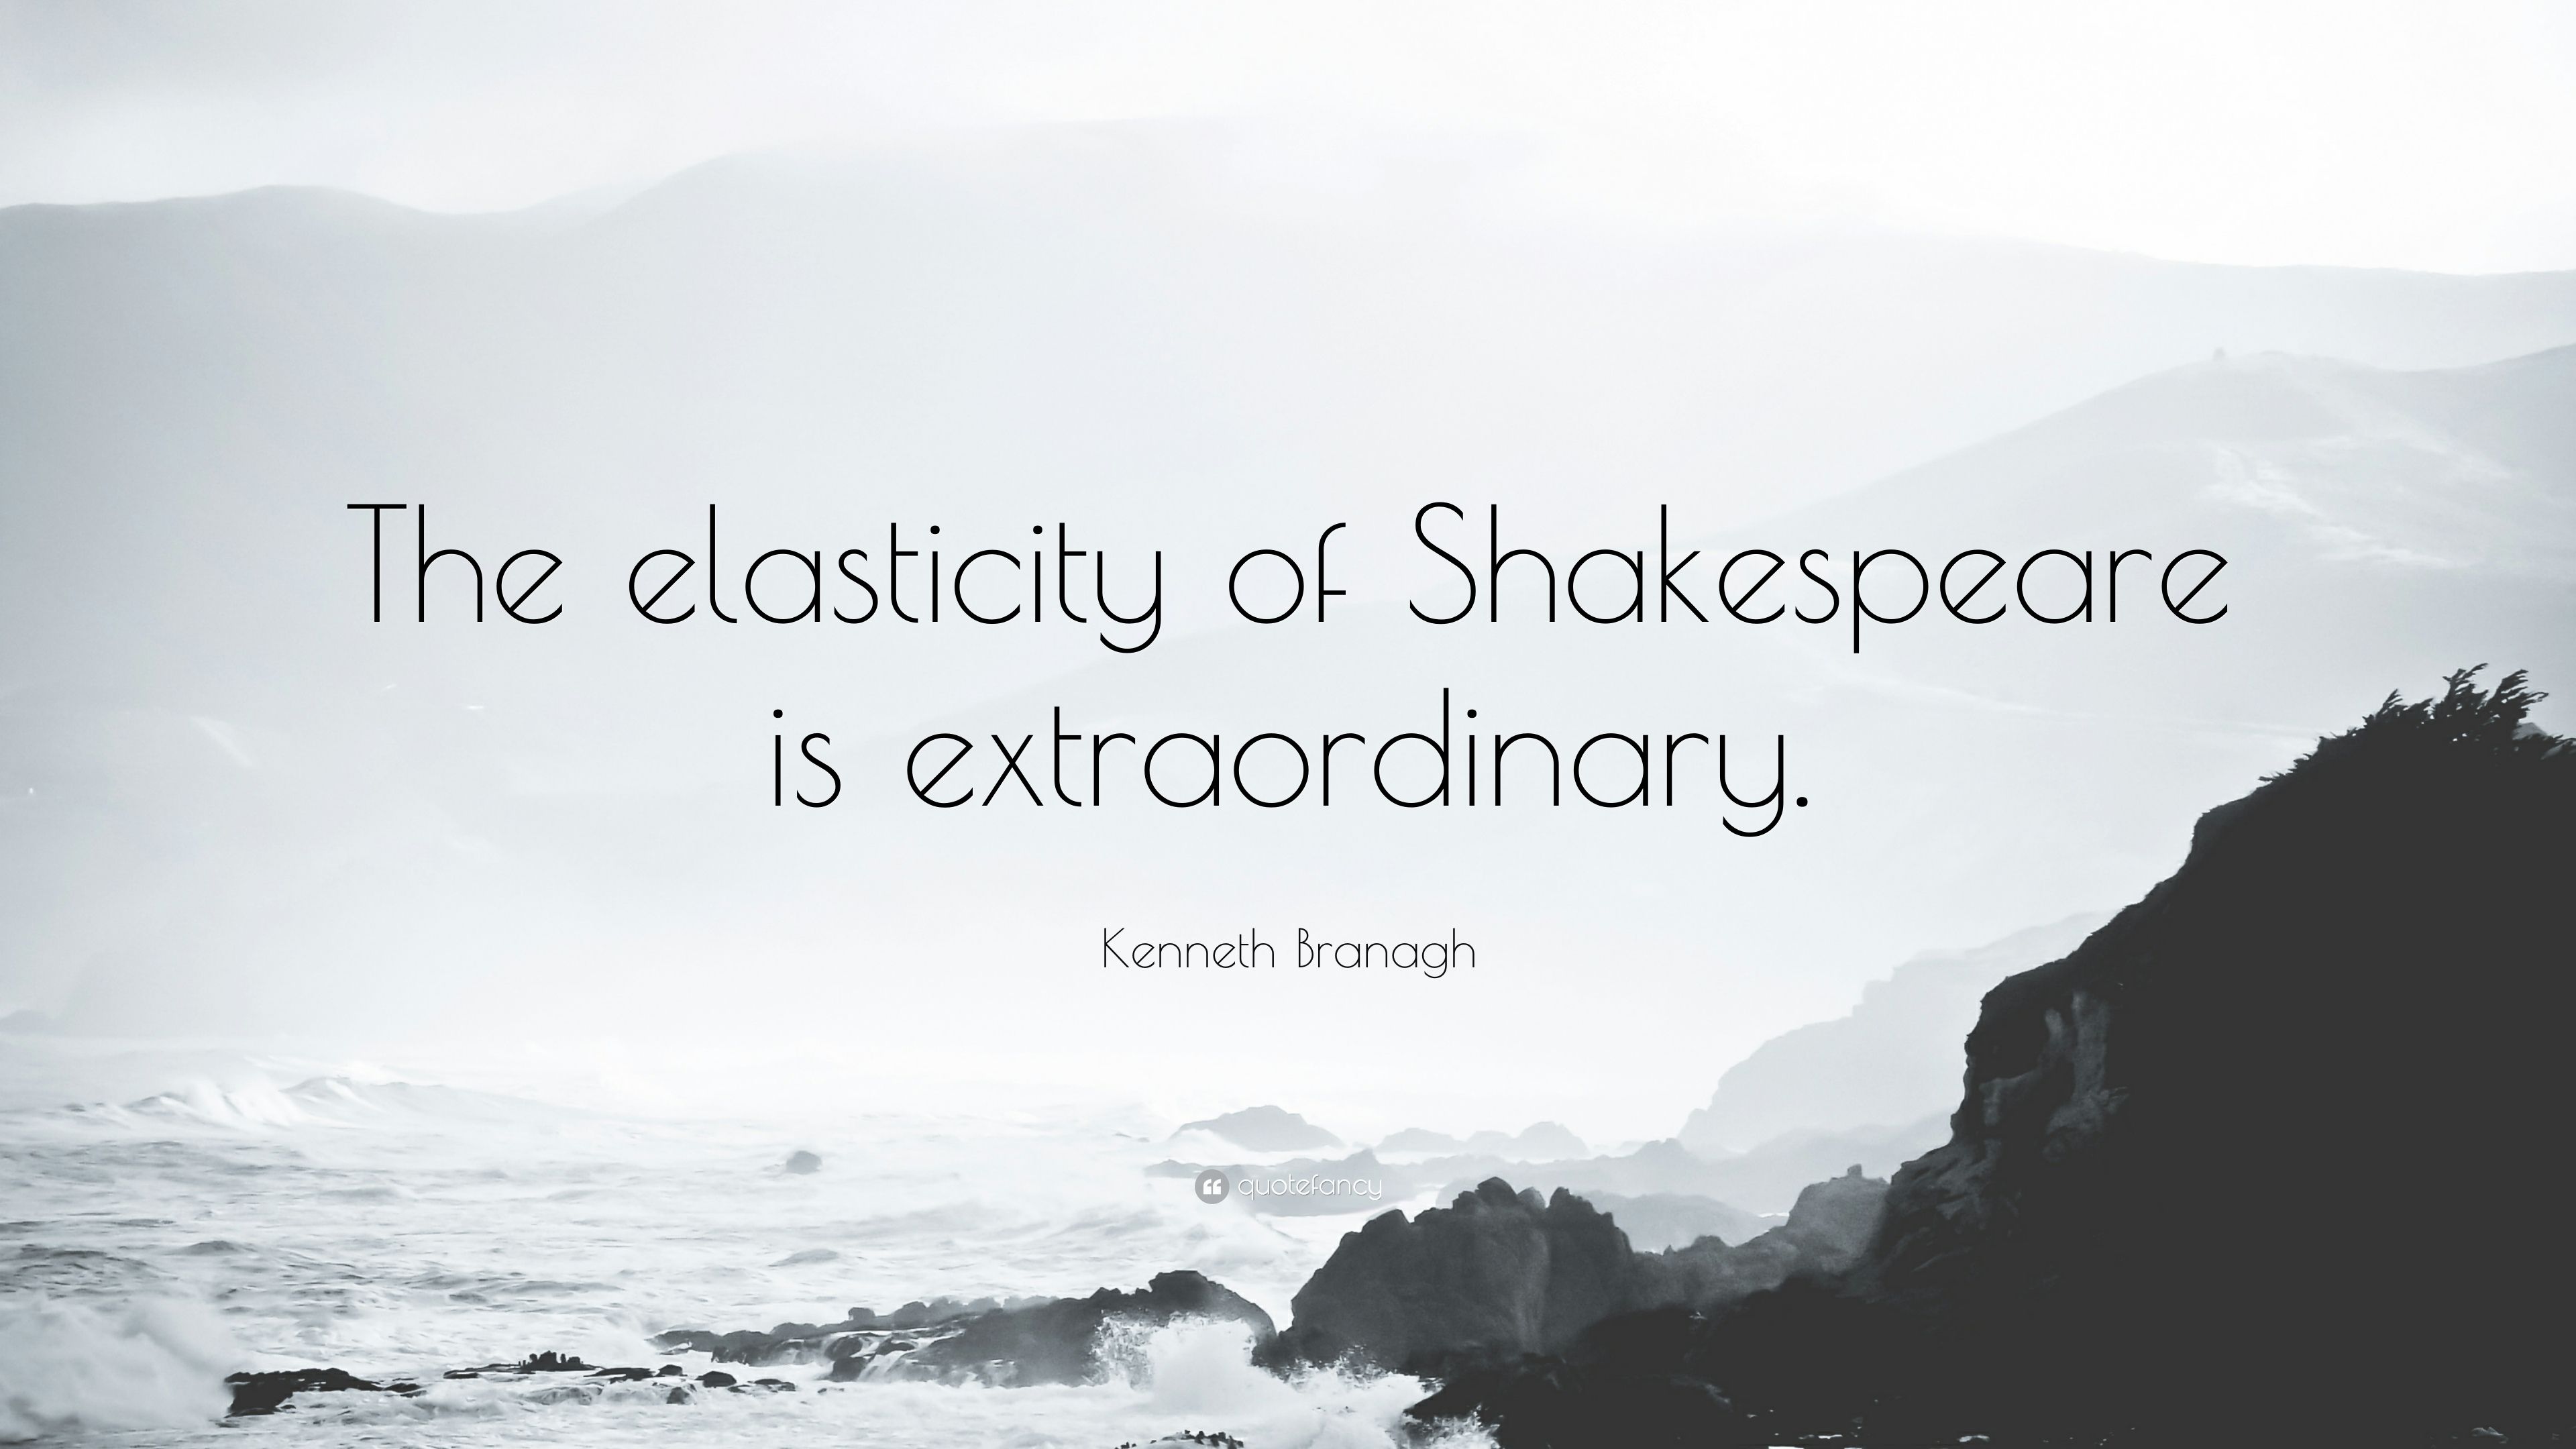 Kenneth Branagh Quote: “The elasticity of Shakespeare is